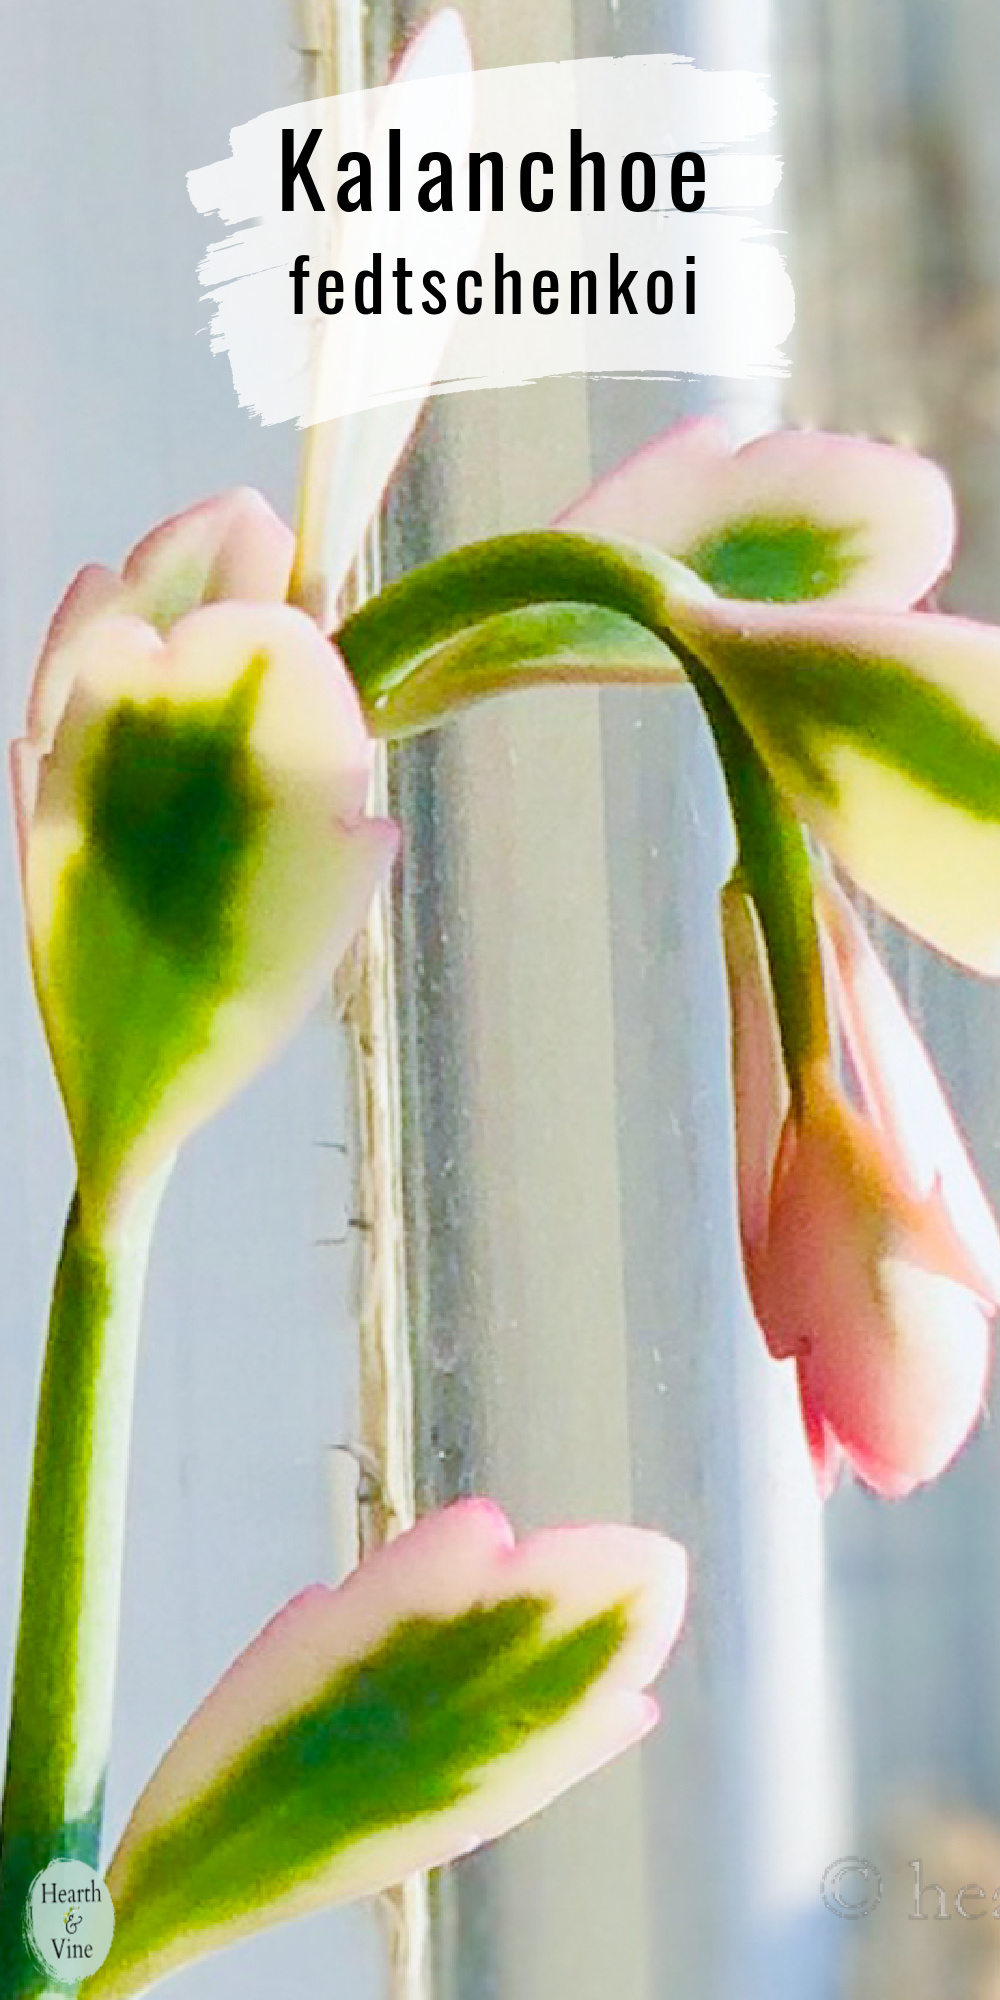 Kalanchoe fedtschenkoi growing in a window with new pink growth.